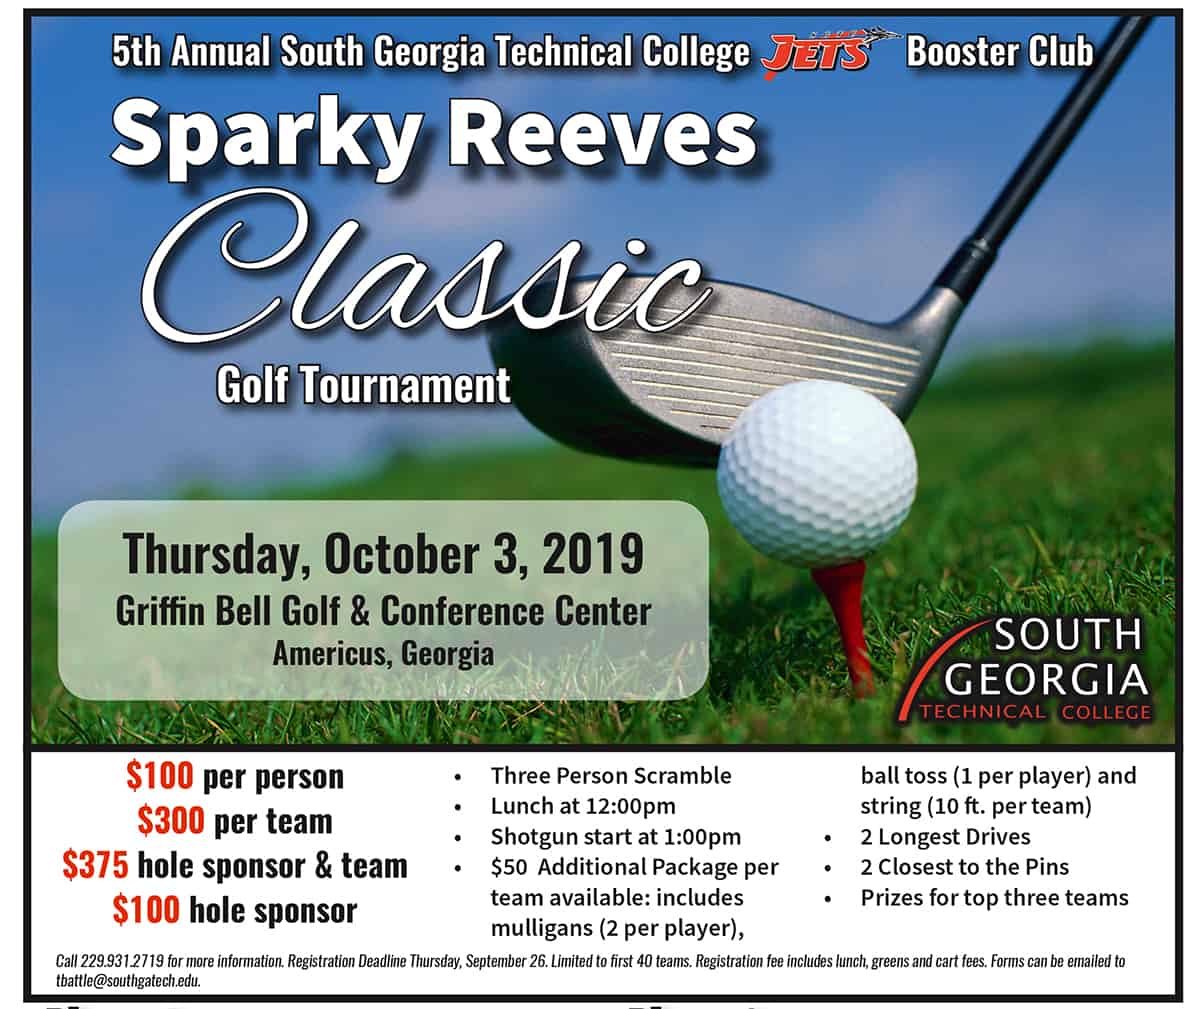 5th annual Sparky Reeves Classic Golf Tournament planned for Thursday, October 3rd, 2019